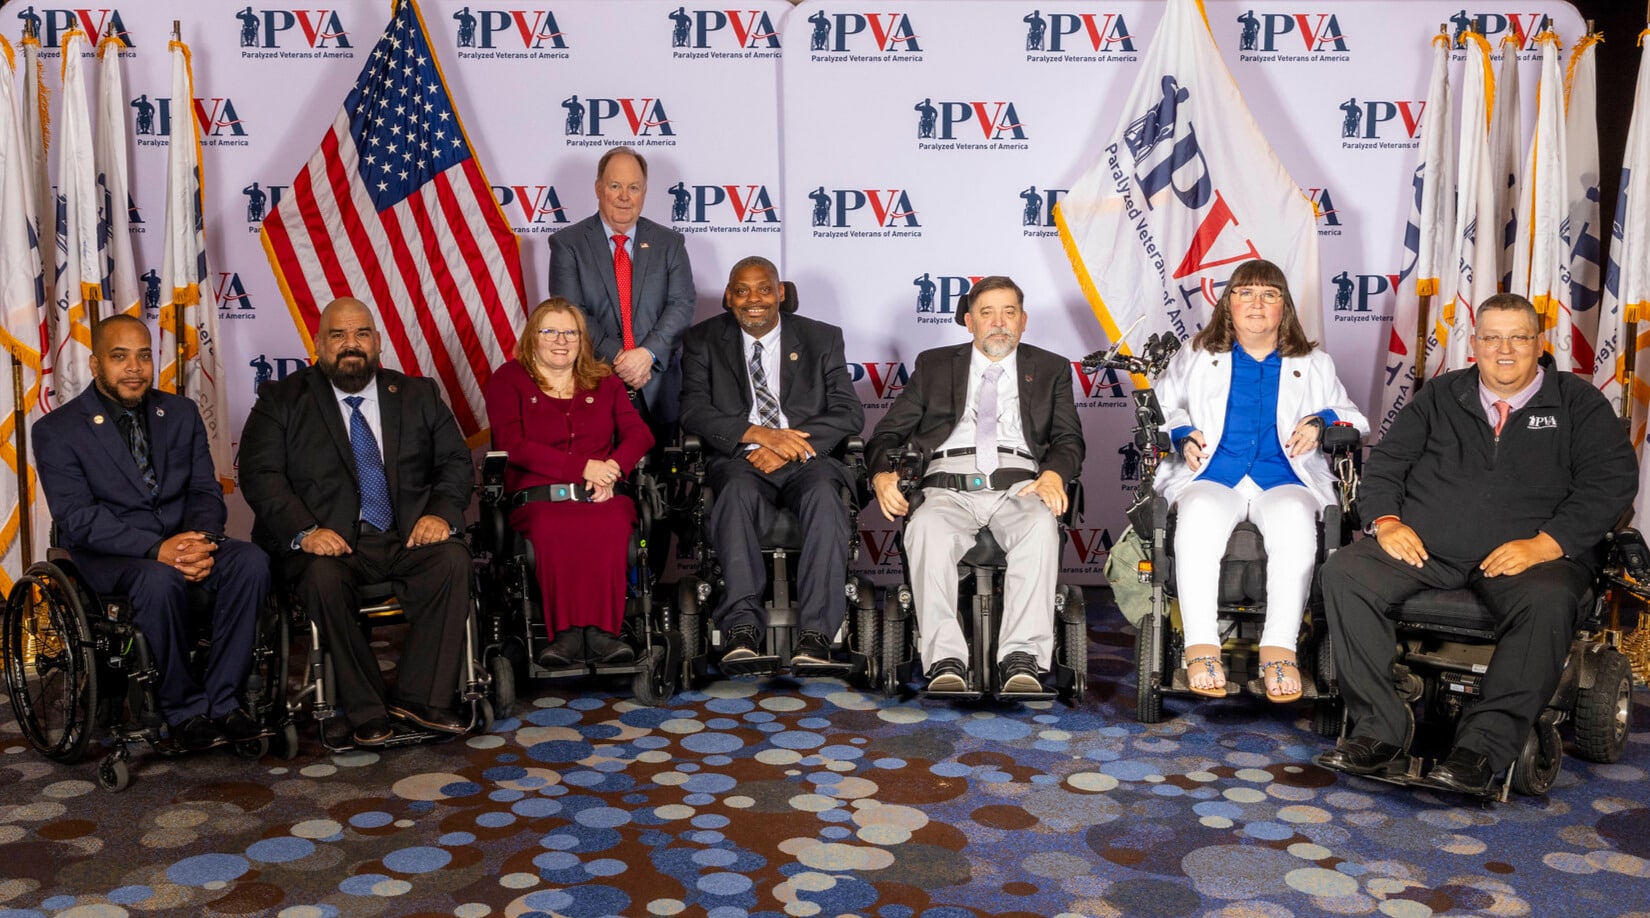 A group of eight individuals, some in wheelchairs, pose for a photo in front of a backdrop with PVA logos and flags. They are dressed in formal attire and appear to be at an event or conference.